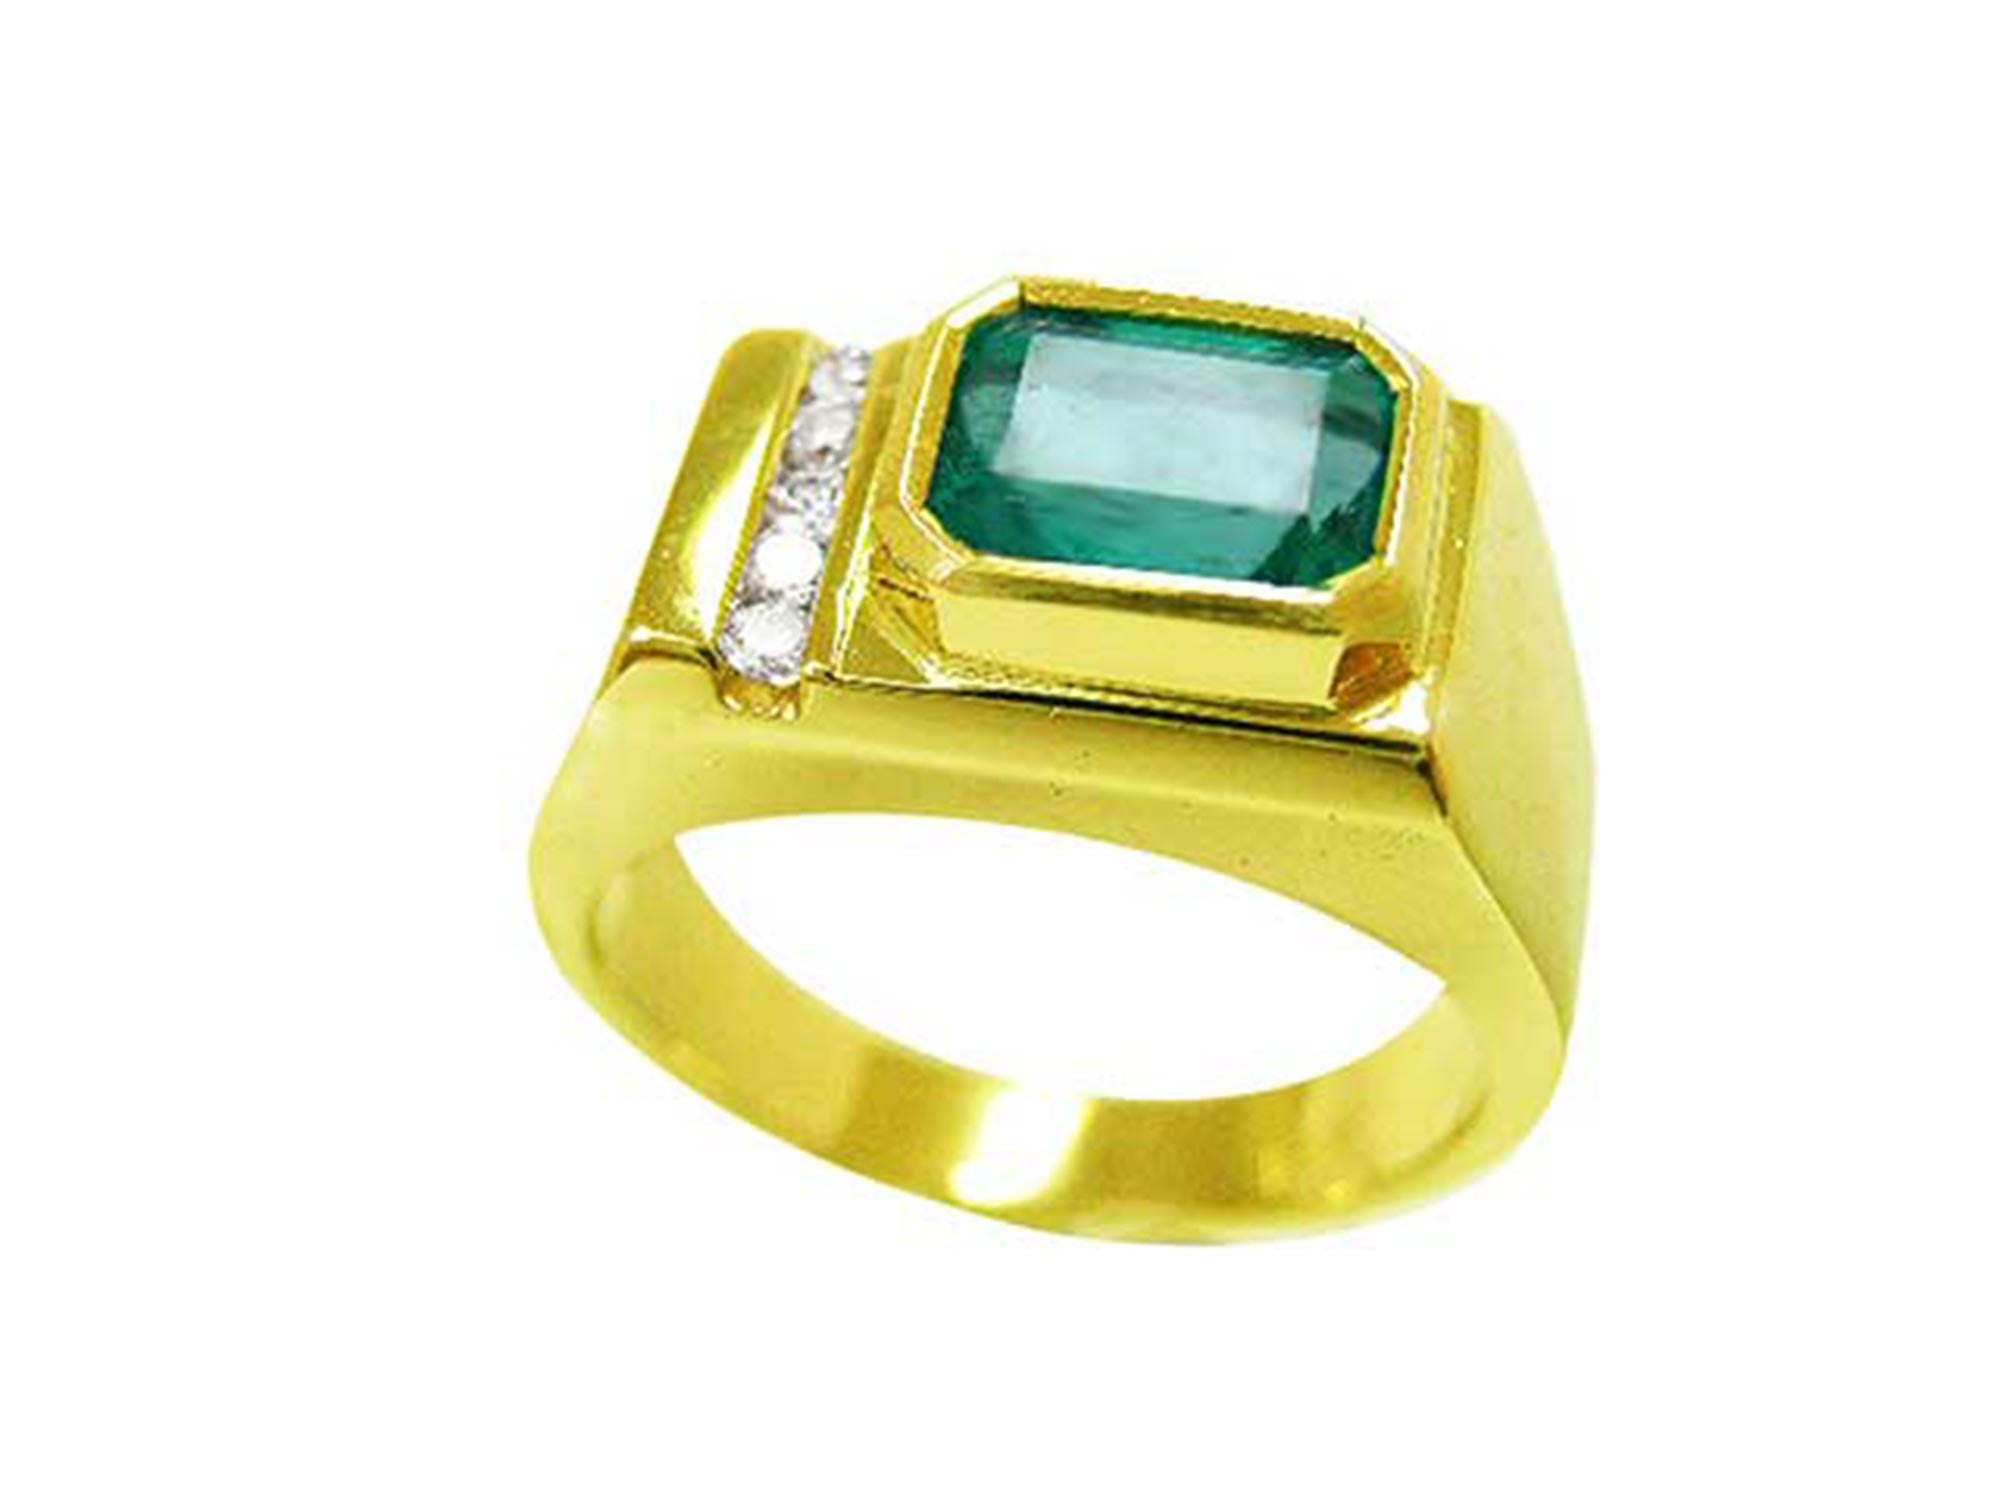 Emerald gold rings for man